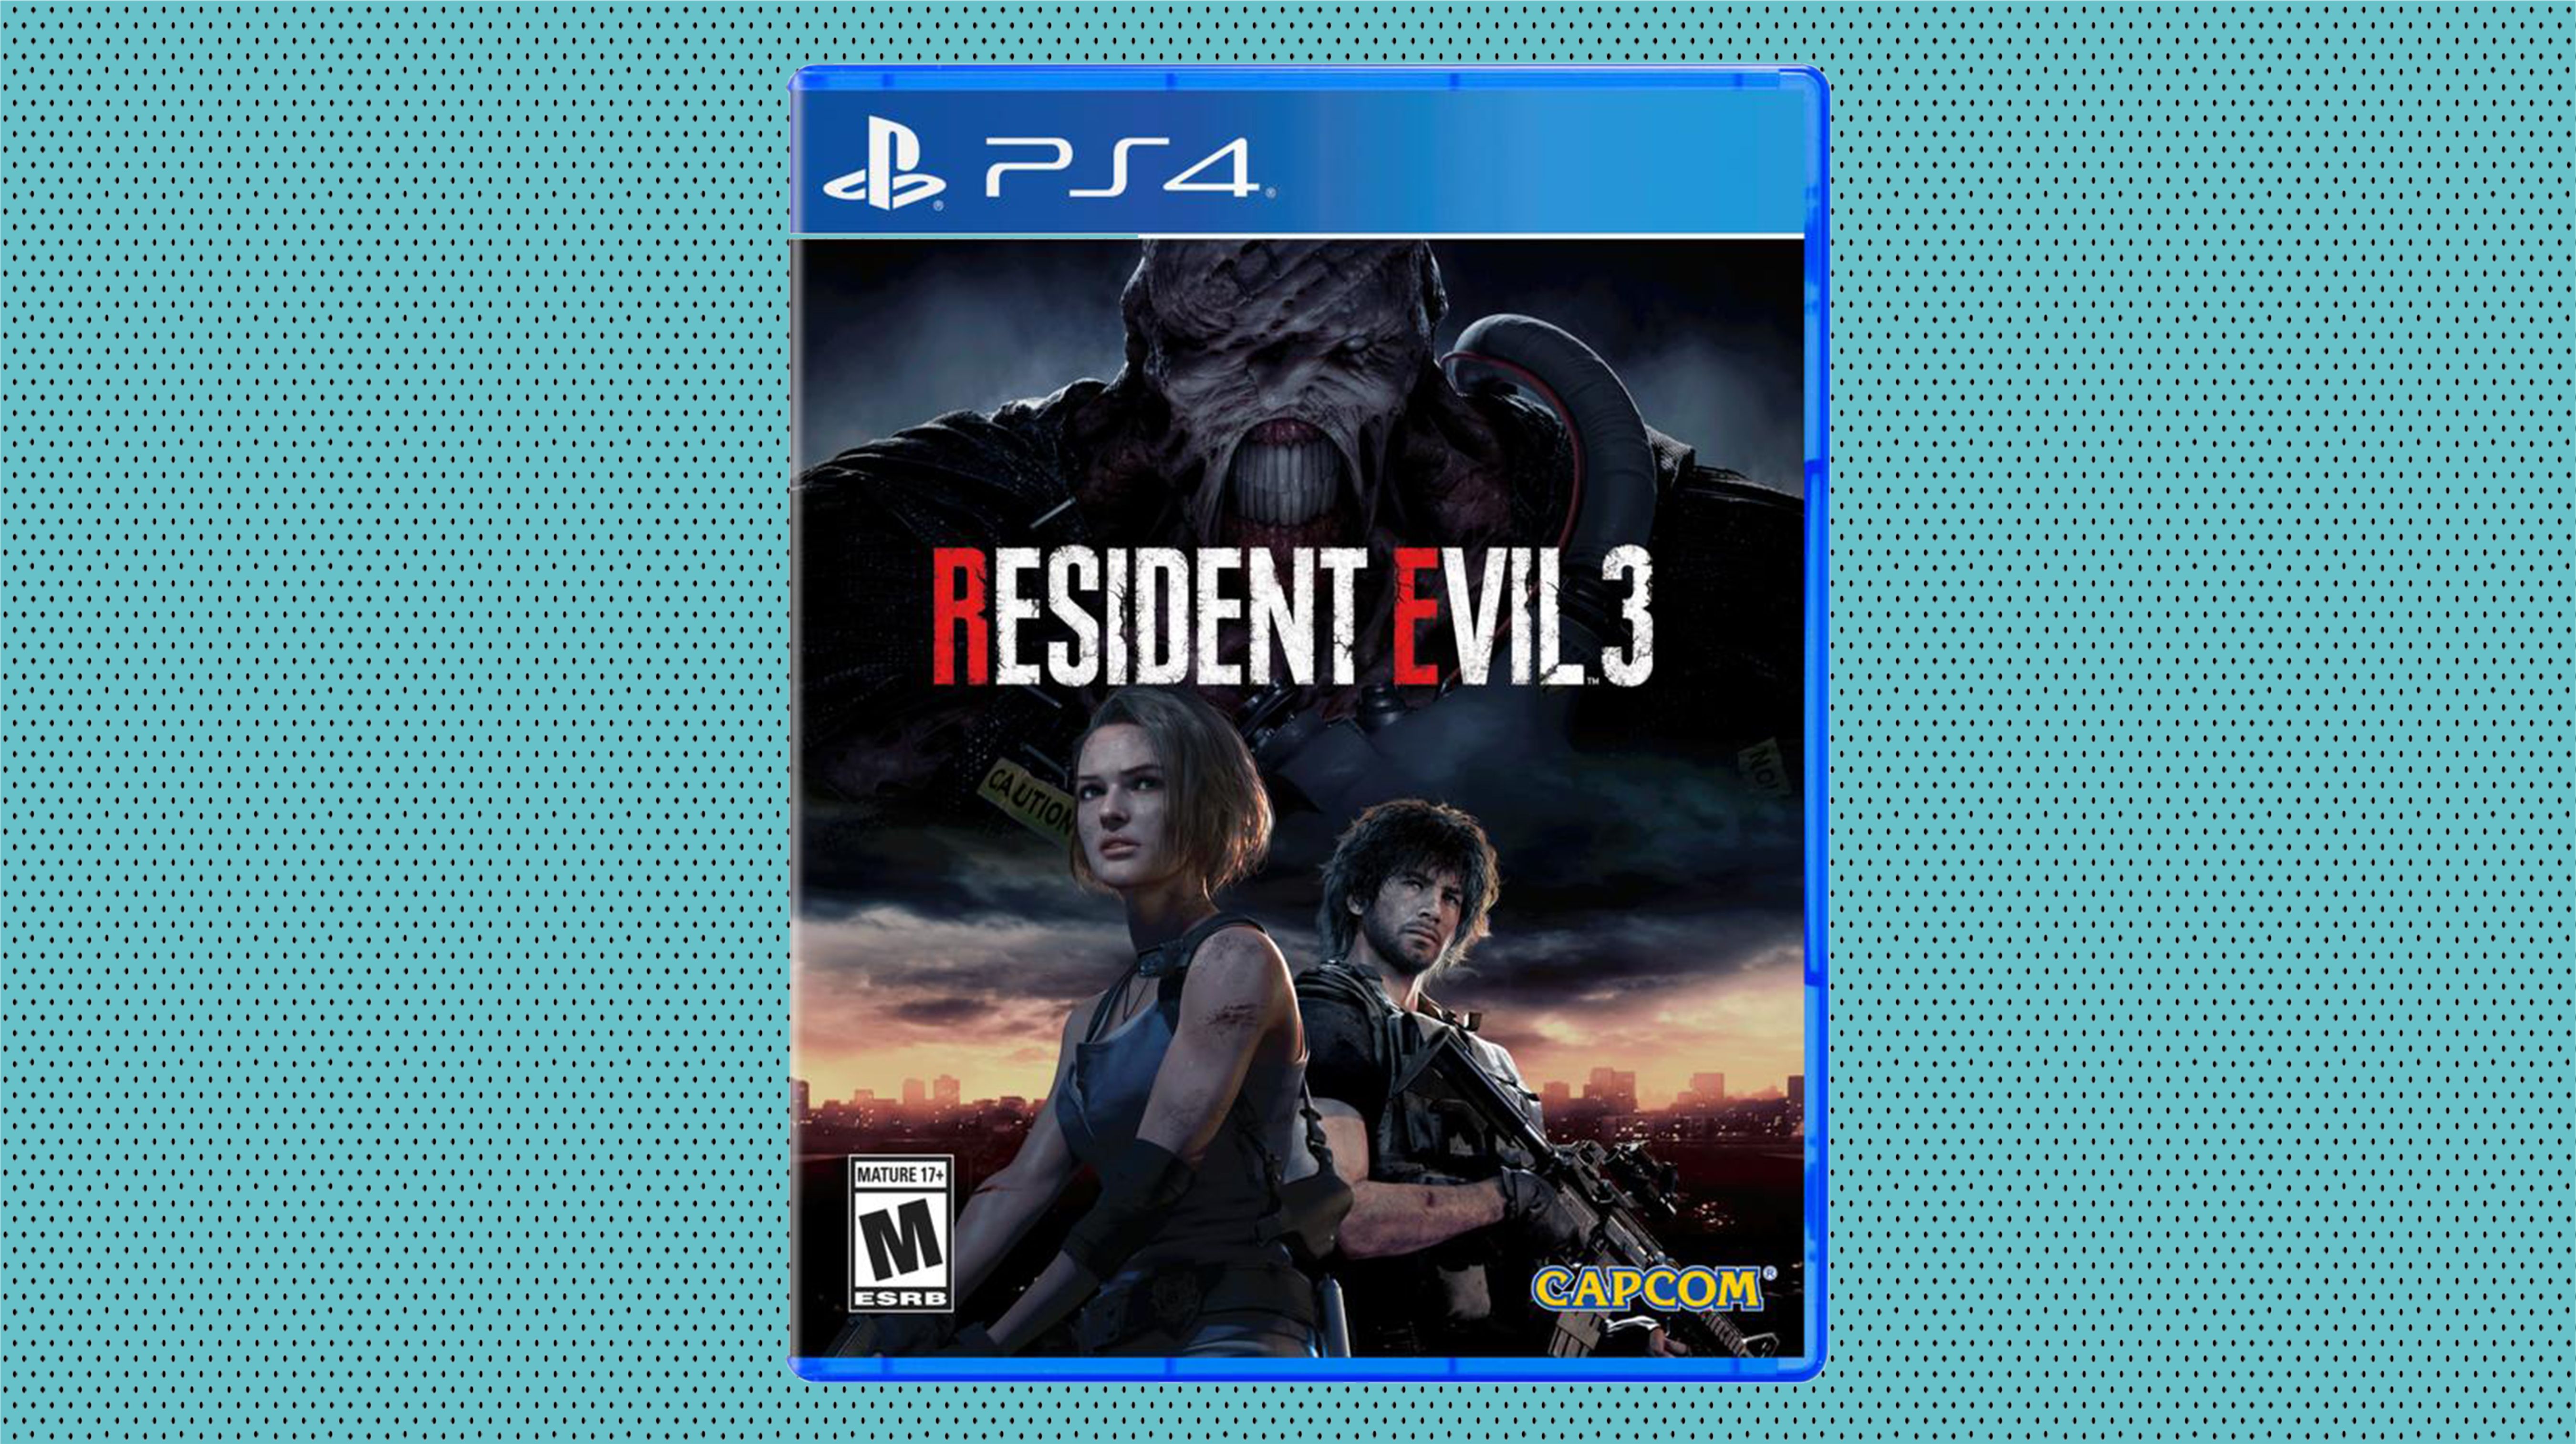 Resident Evil 3 Remake (PlayStation 5) Cover Art Only, No Game Included